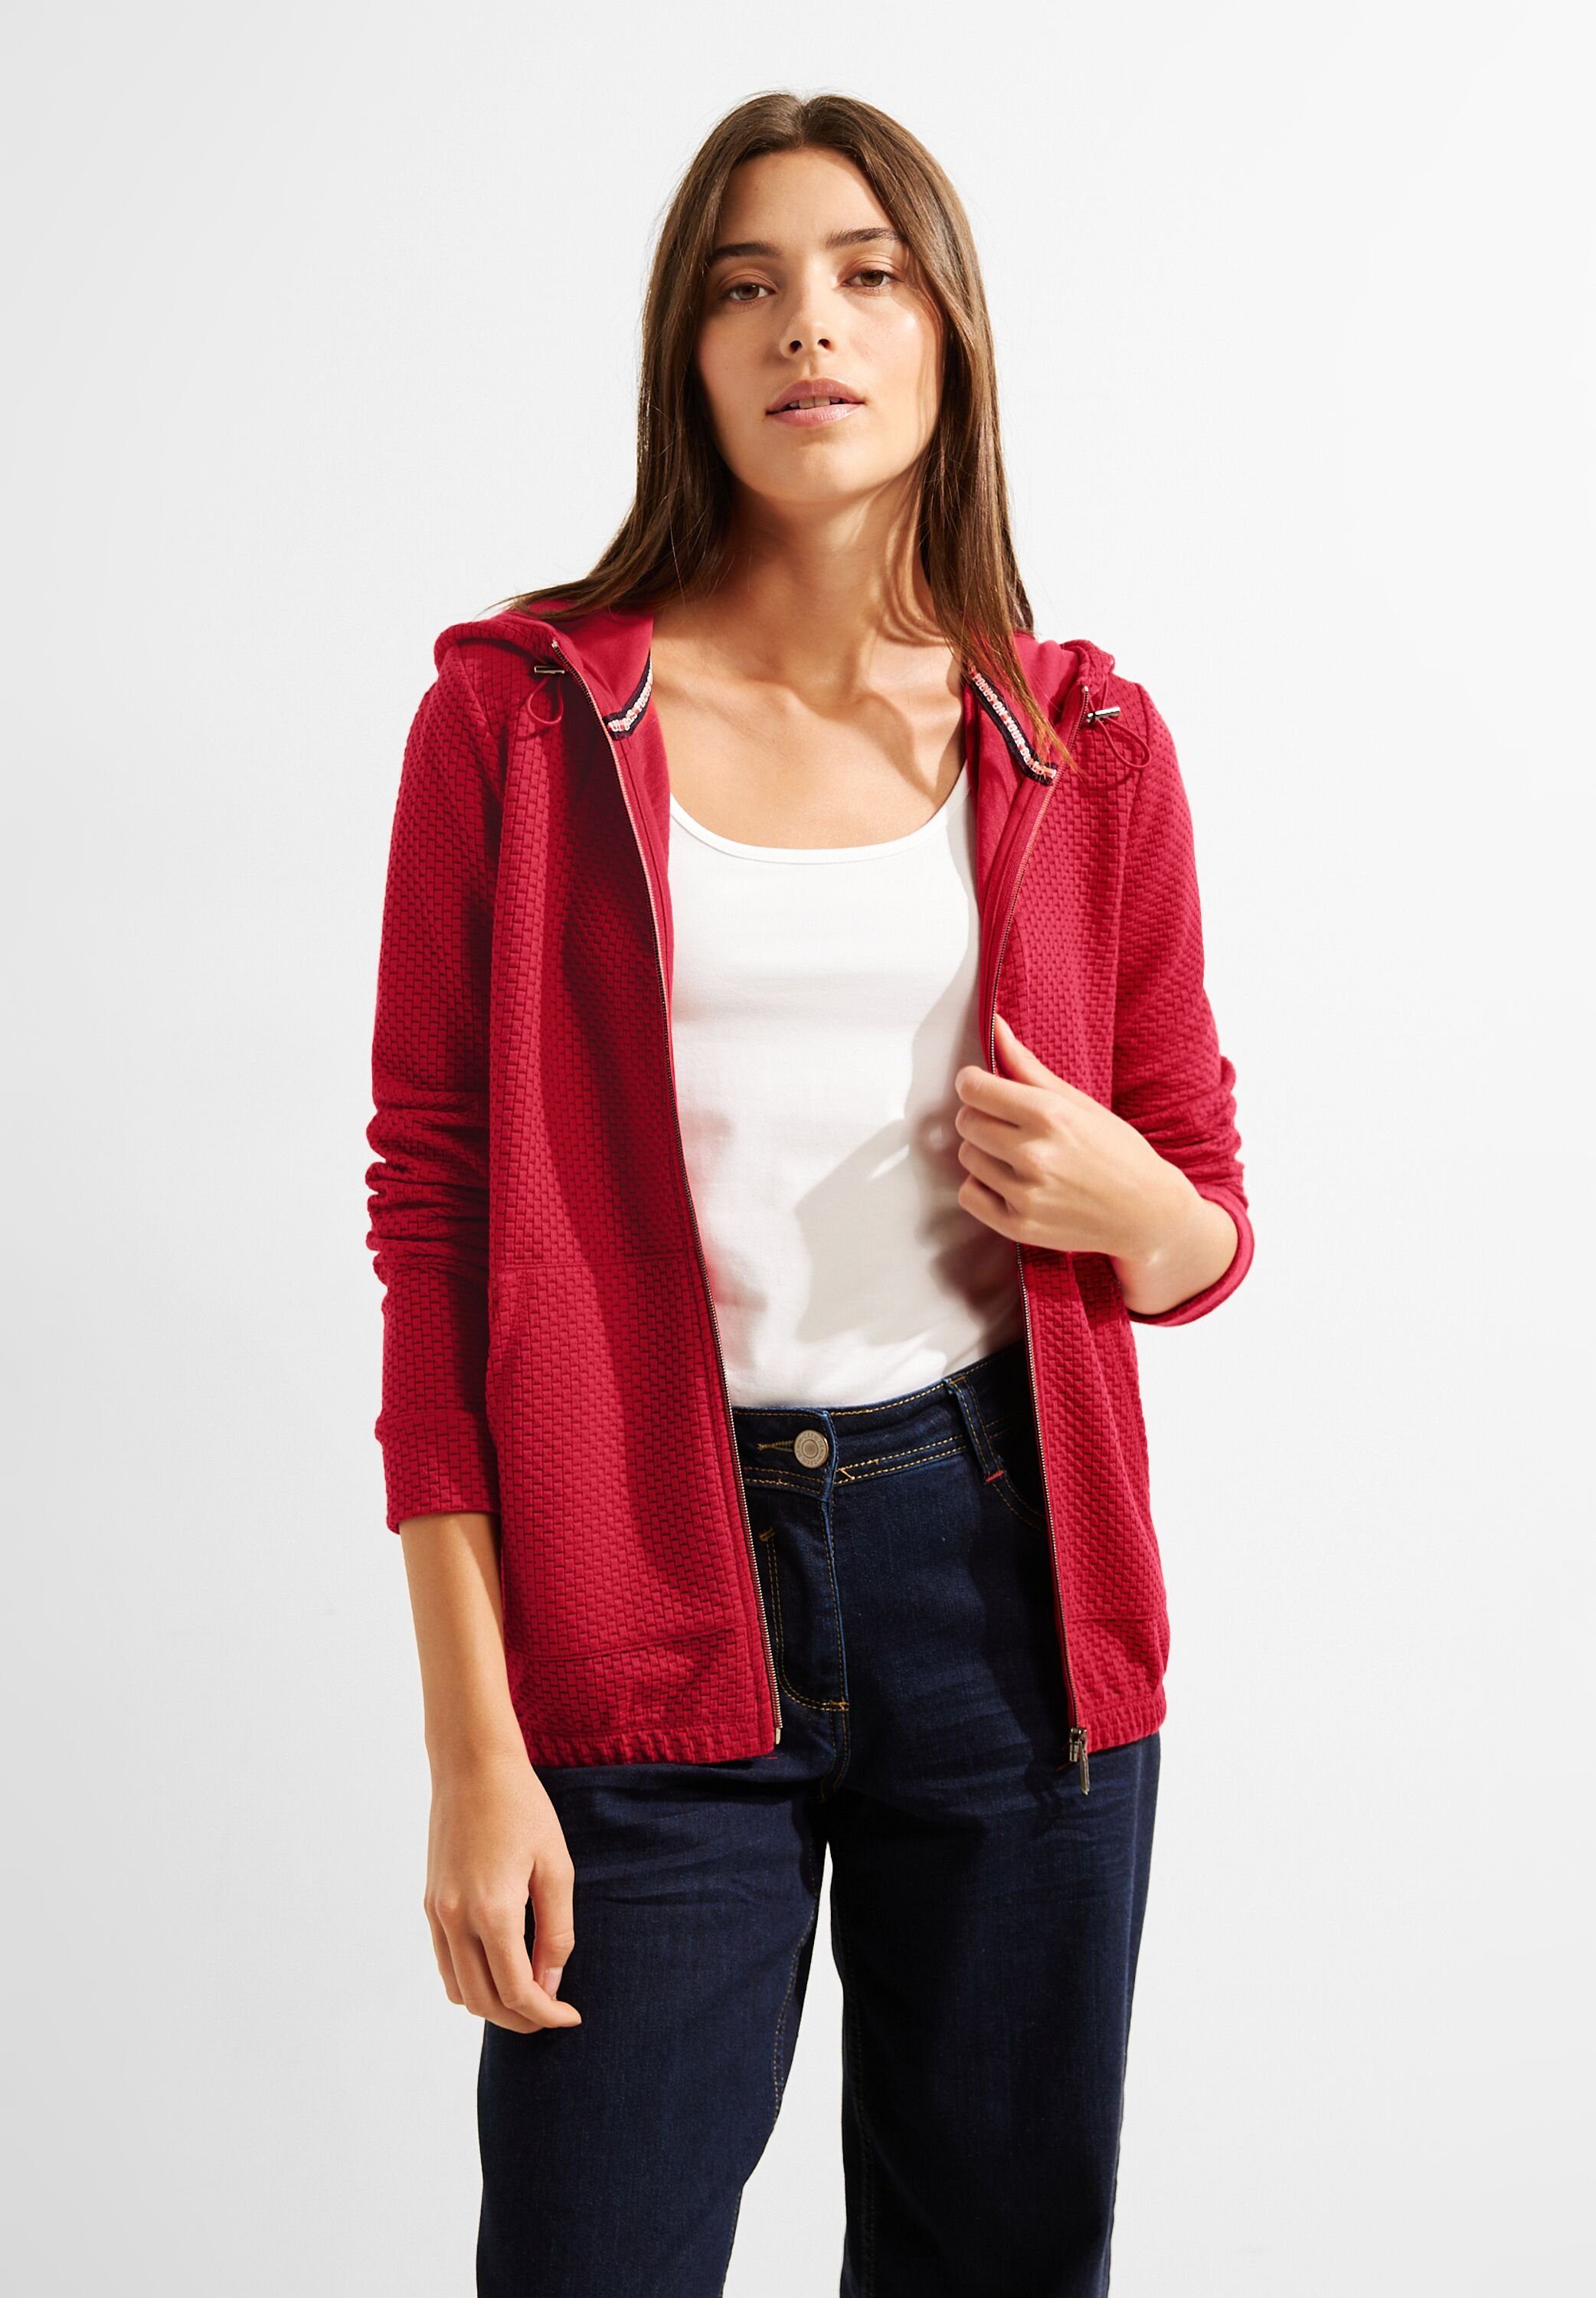 Cecil Shirtjacke mit Struktur casual red